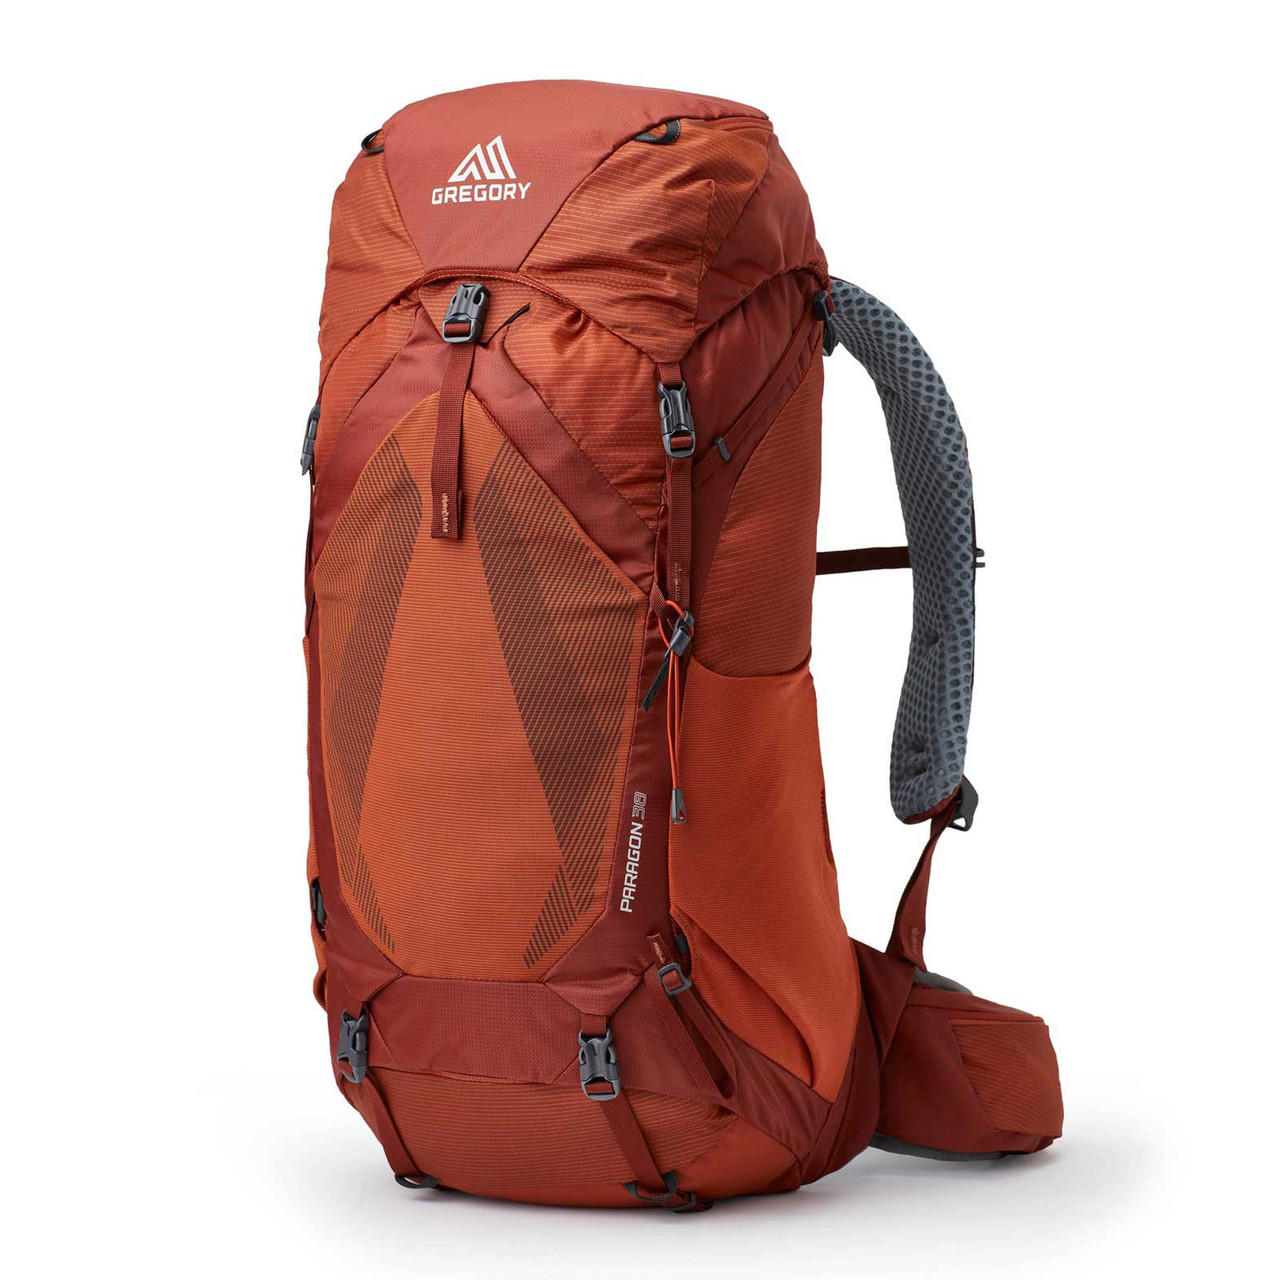 Gregory Katmai Review: Hands-On With The 55L Backpacking Bag